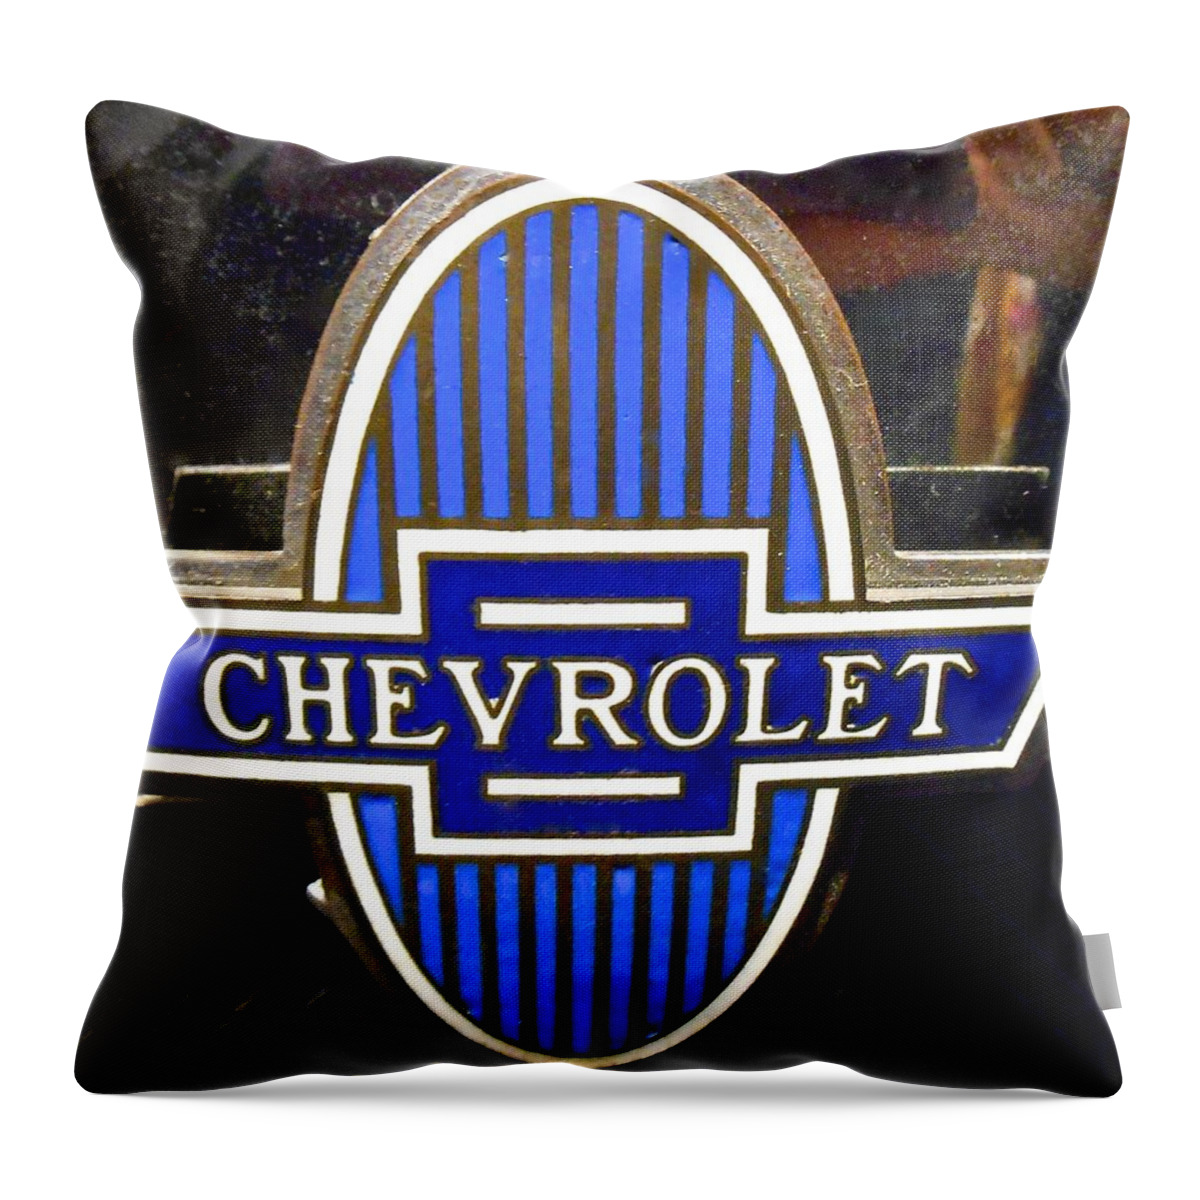 American Vintage Cars Throw Pillow featuring the photograph Vintage Chevrolet Logo by Joan Reese